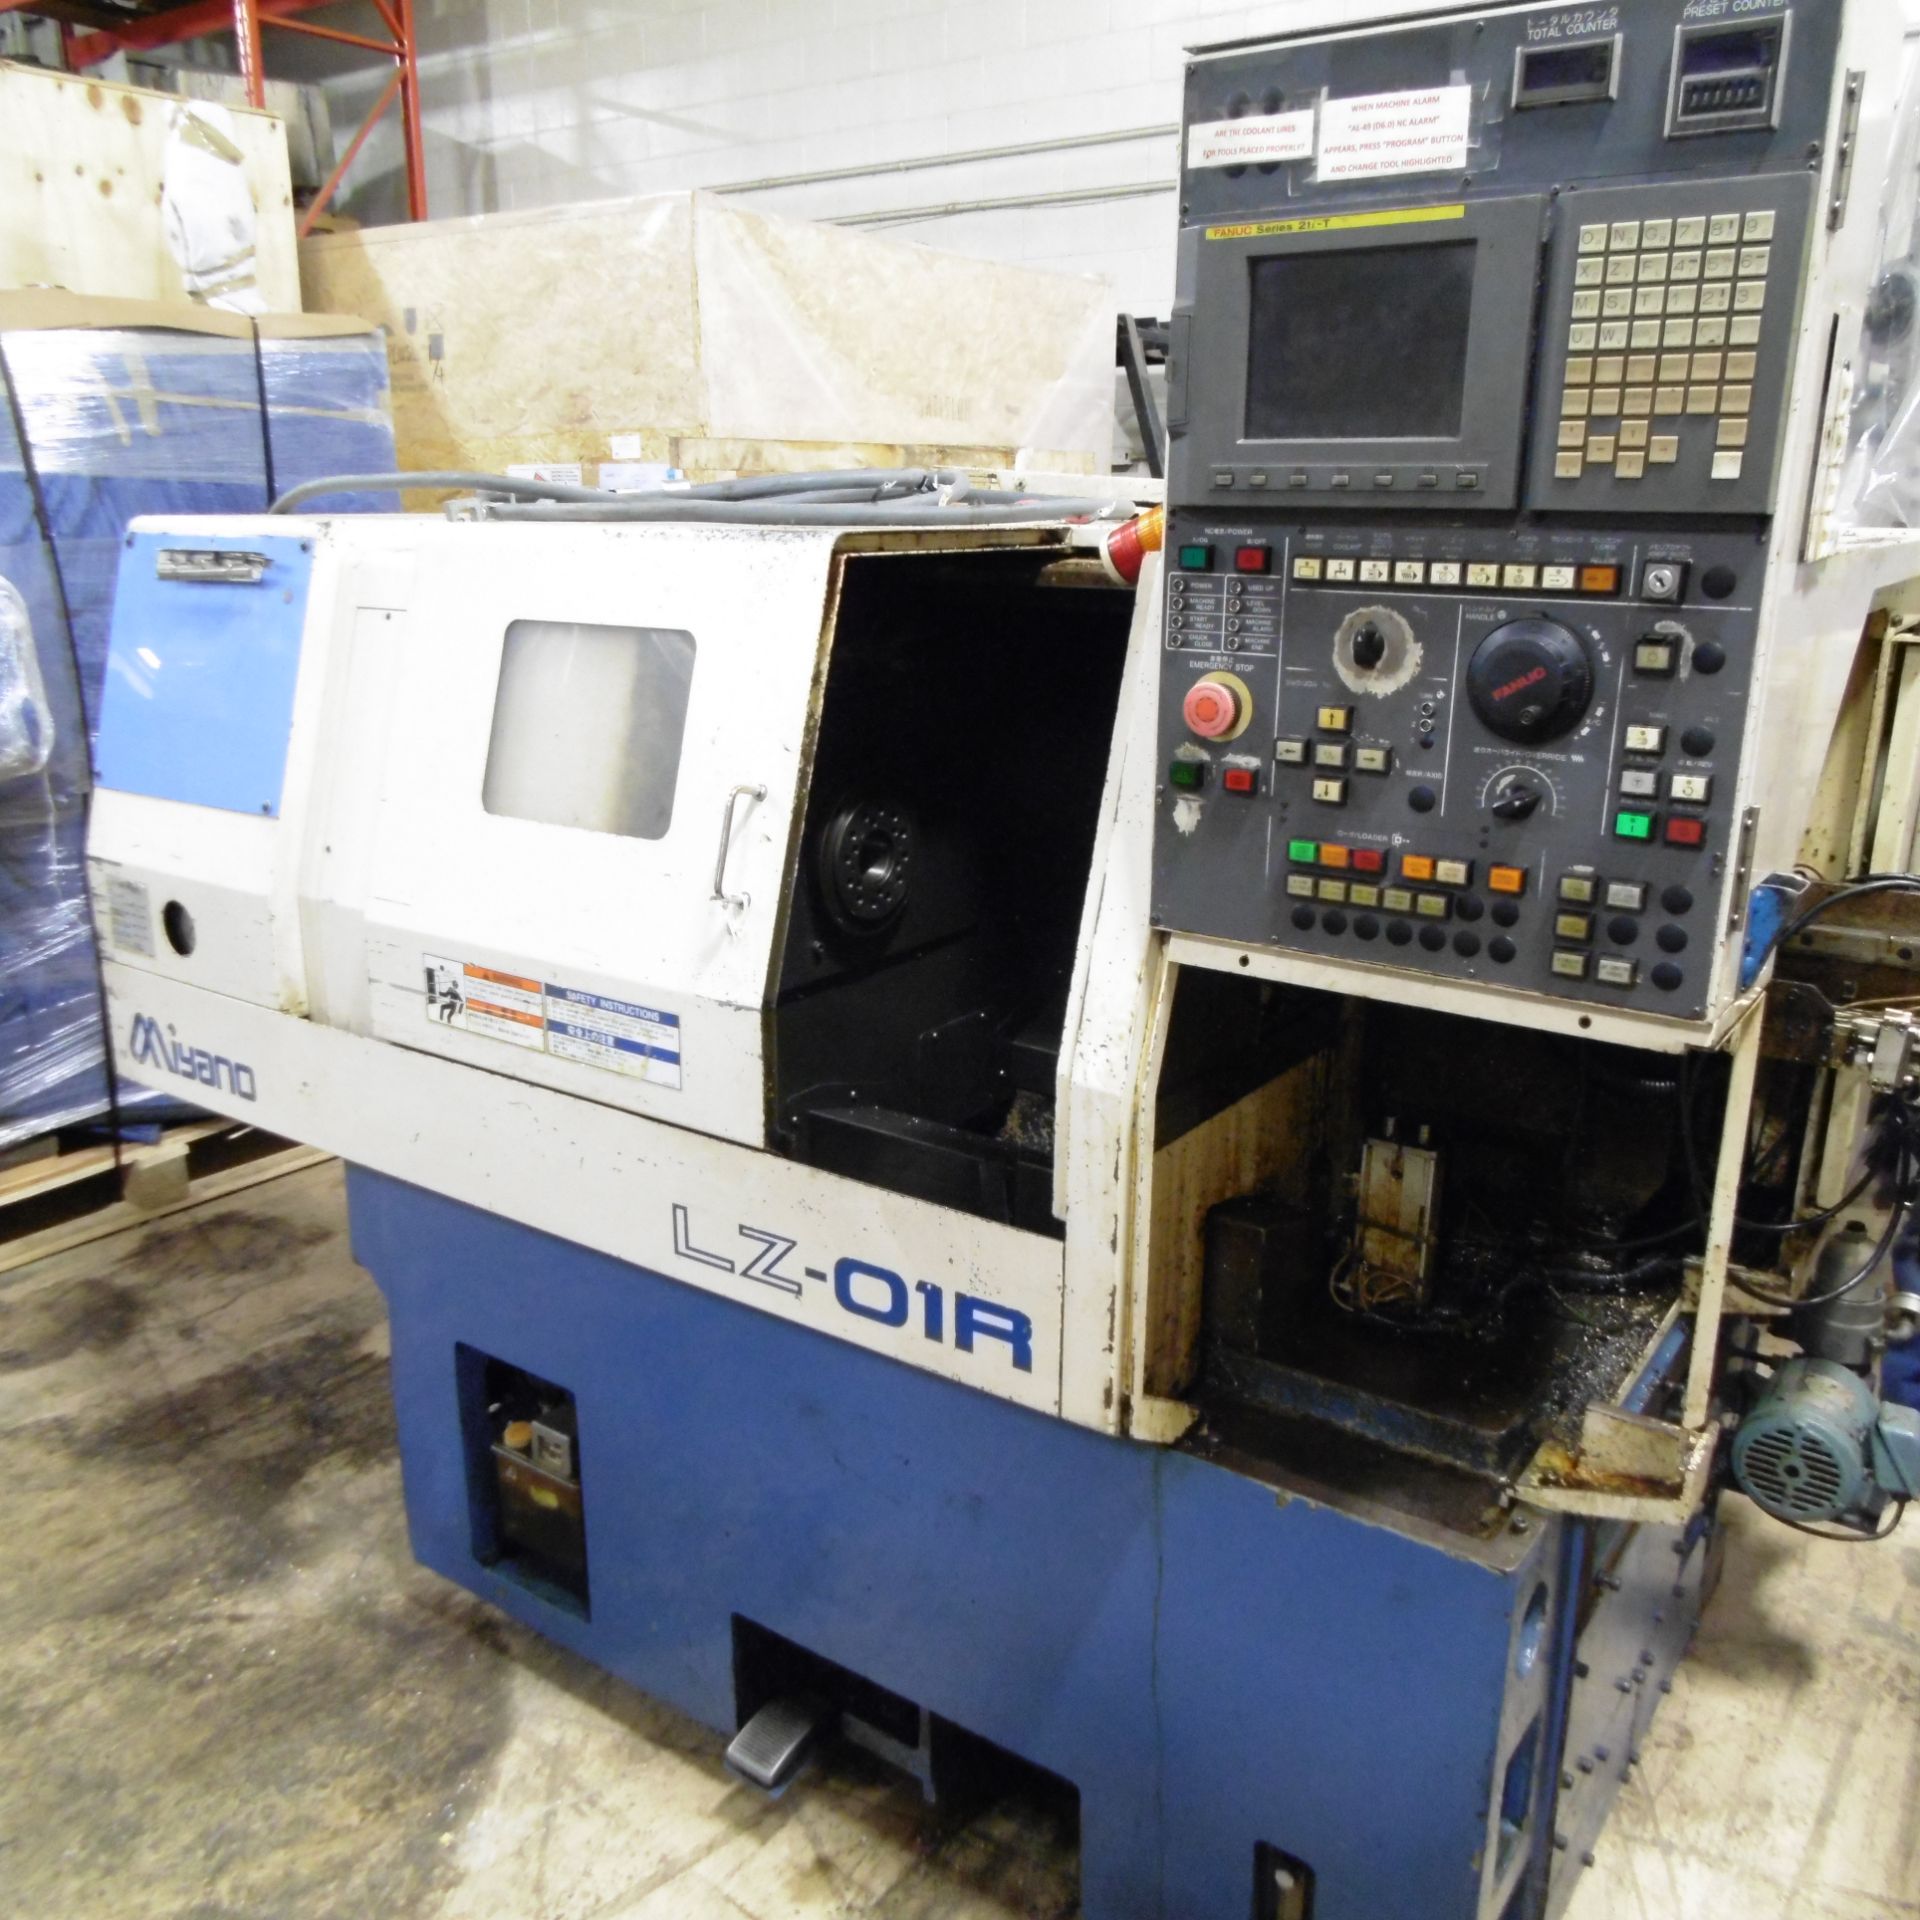 MIYANO LZ-1OR CNC TURNING CENTER WITH FANUC SERIES 21i-T CNC CONTROL, TRAVELS X-9.44", Z-7.48", 60-